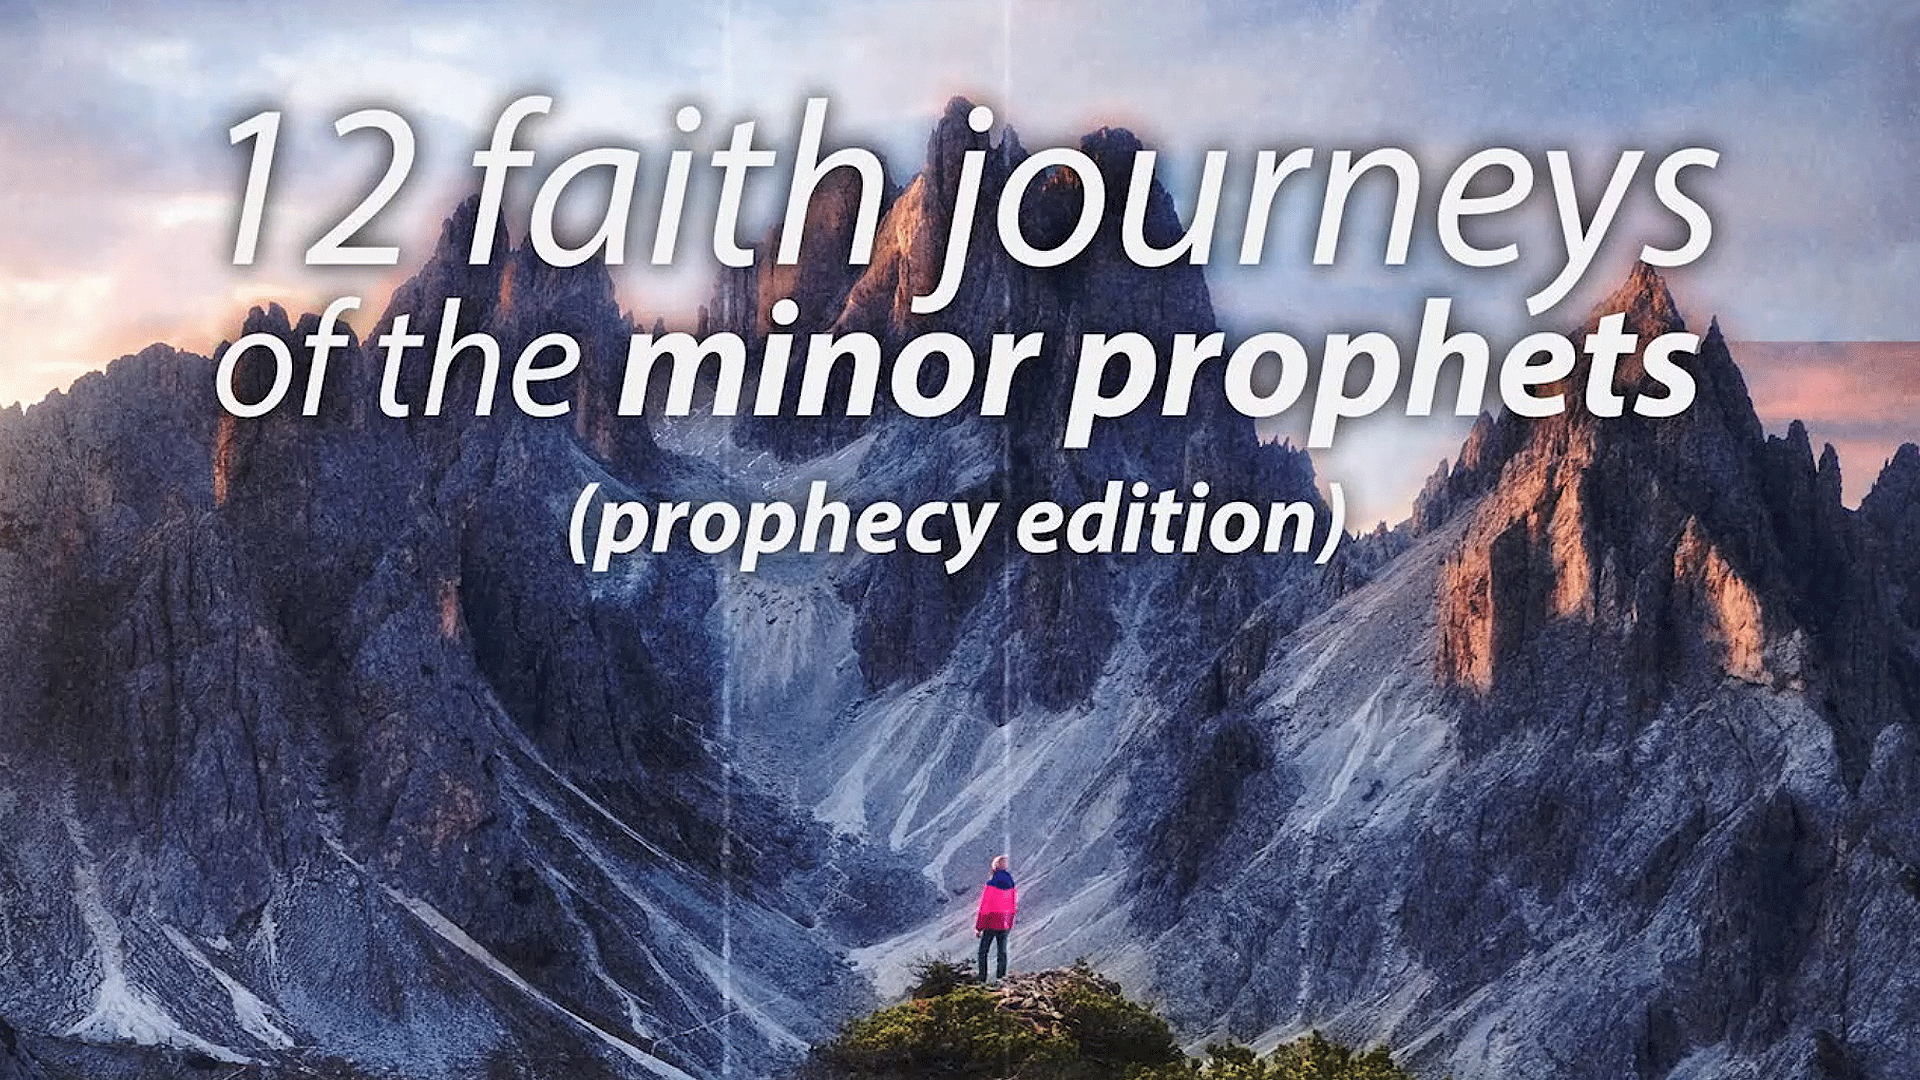 Every Prophecy from the Minor Prophets - Thumb